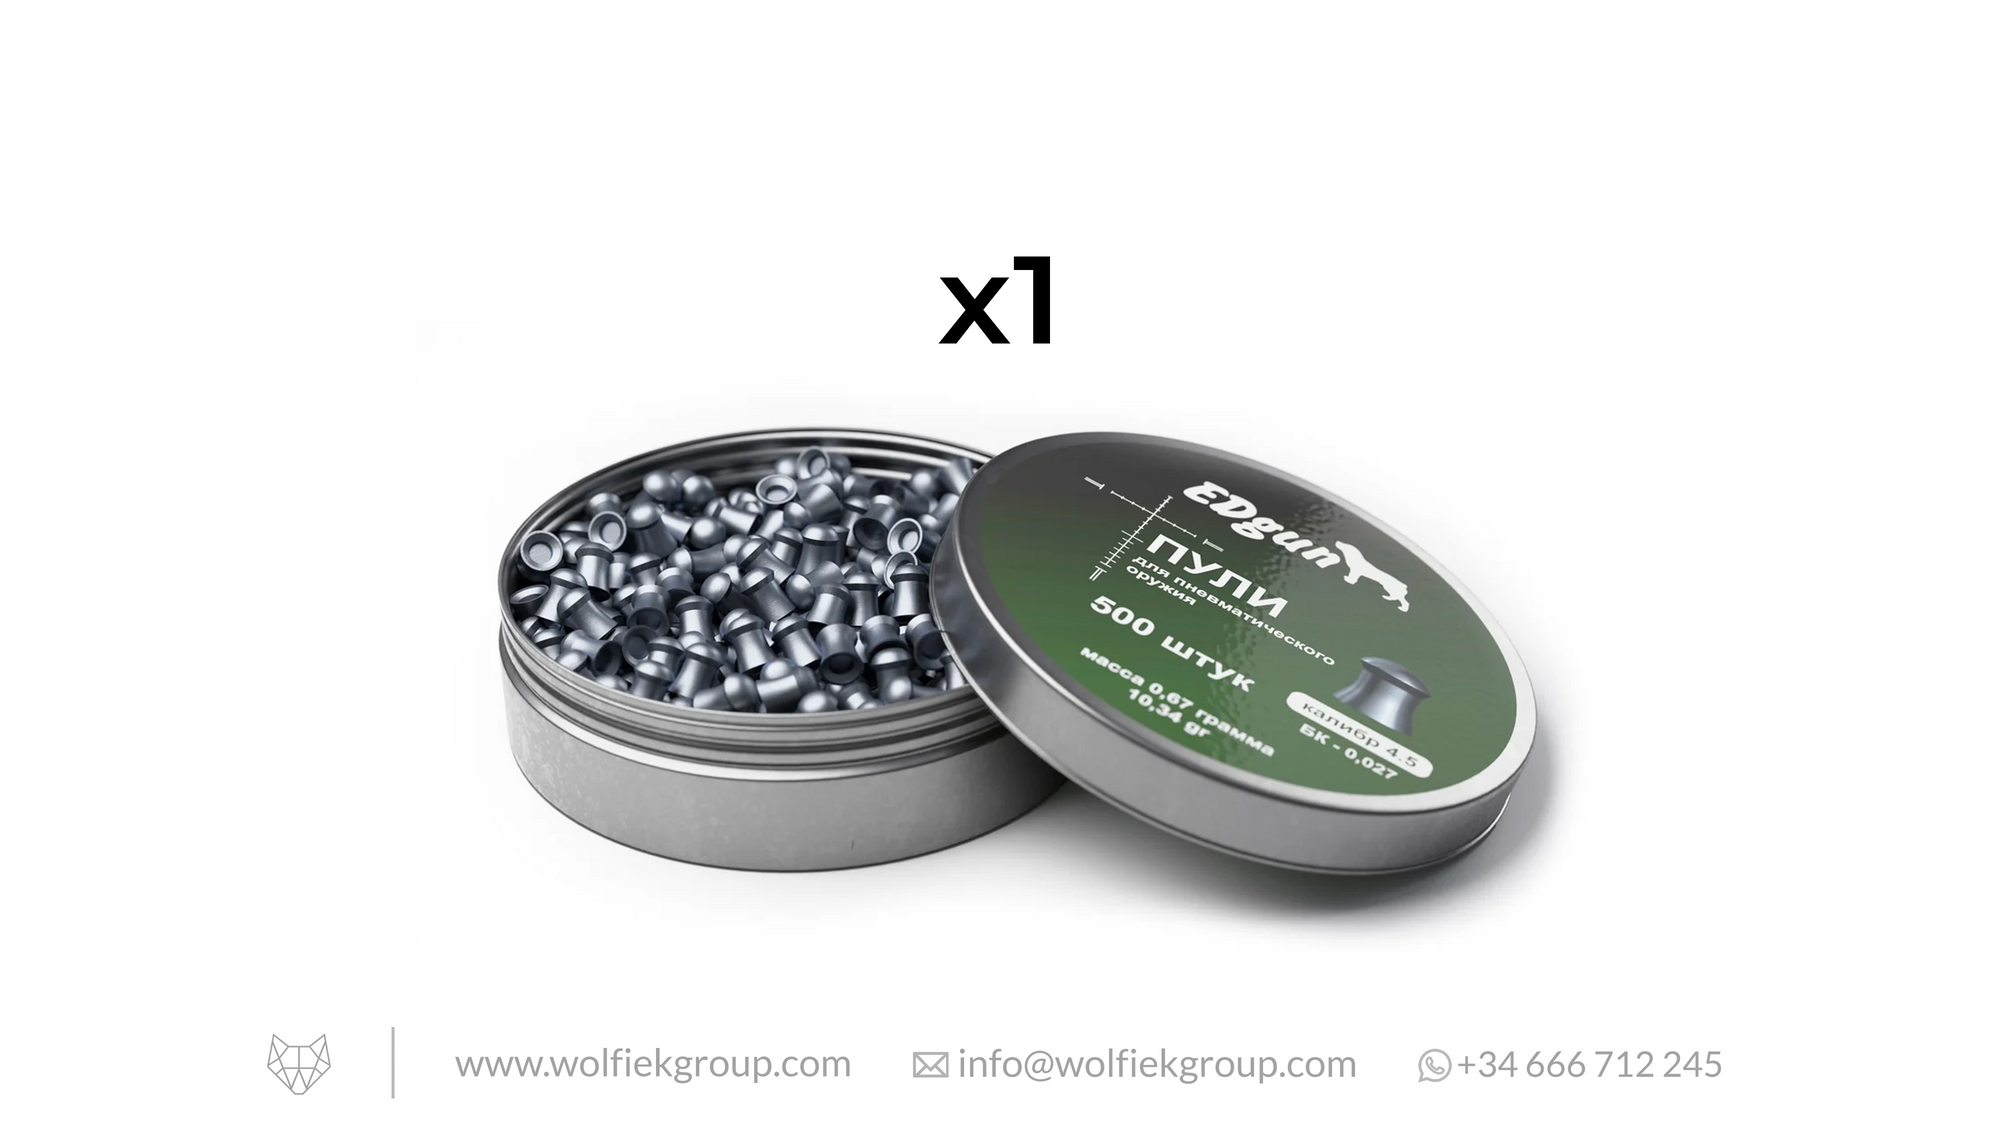 EDgun Premium Pellets Cal .177 (4,52mm) Weight 0,67g (10,34gr) with text buy 4 get 1 for free